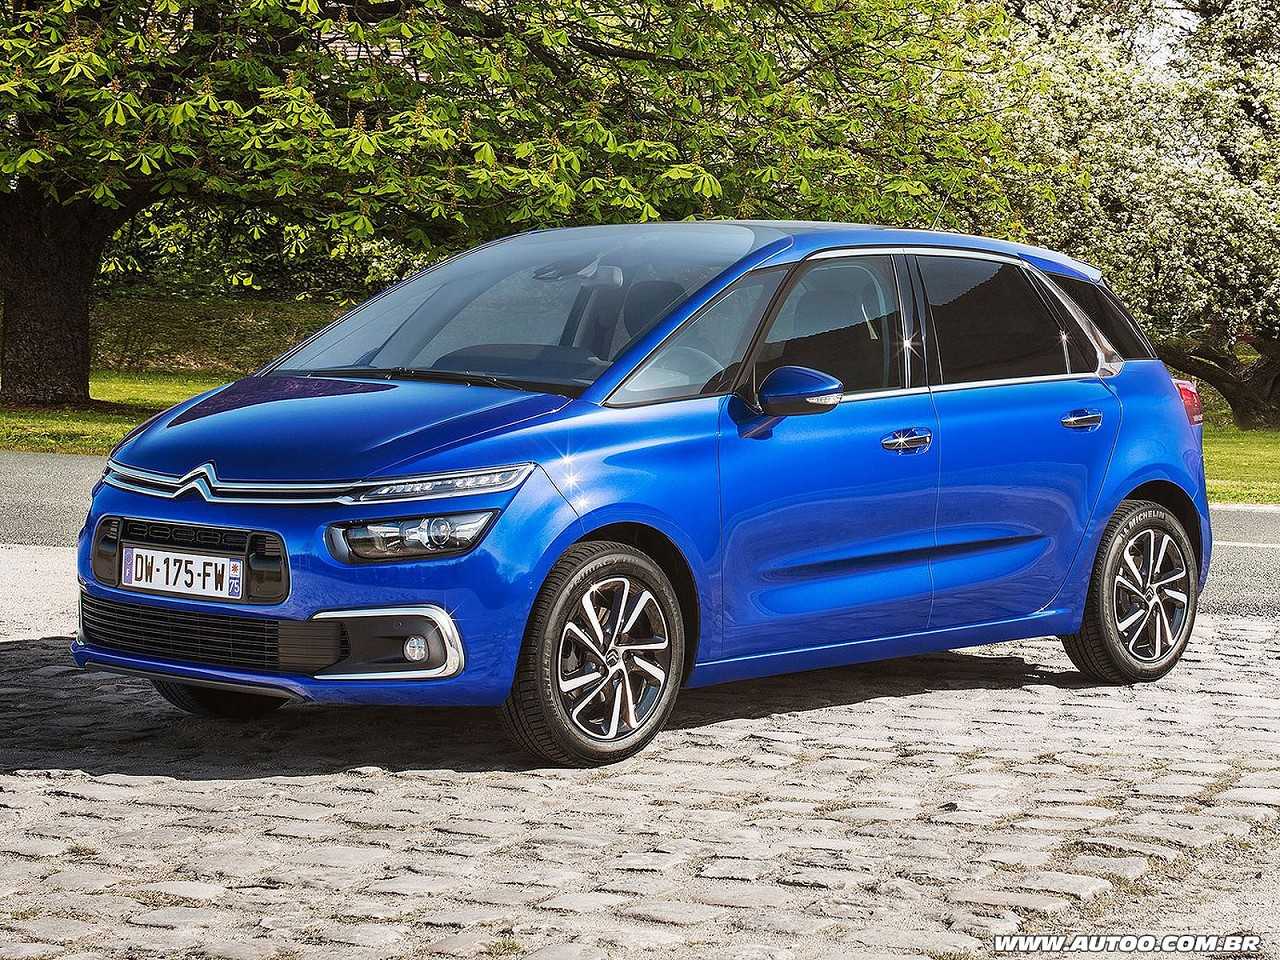 CitronC4 Picasso 2018 - ngulo frontal